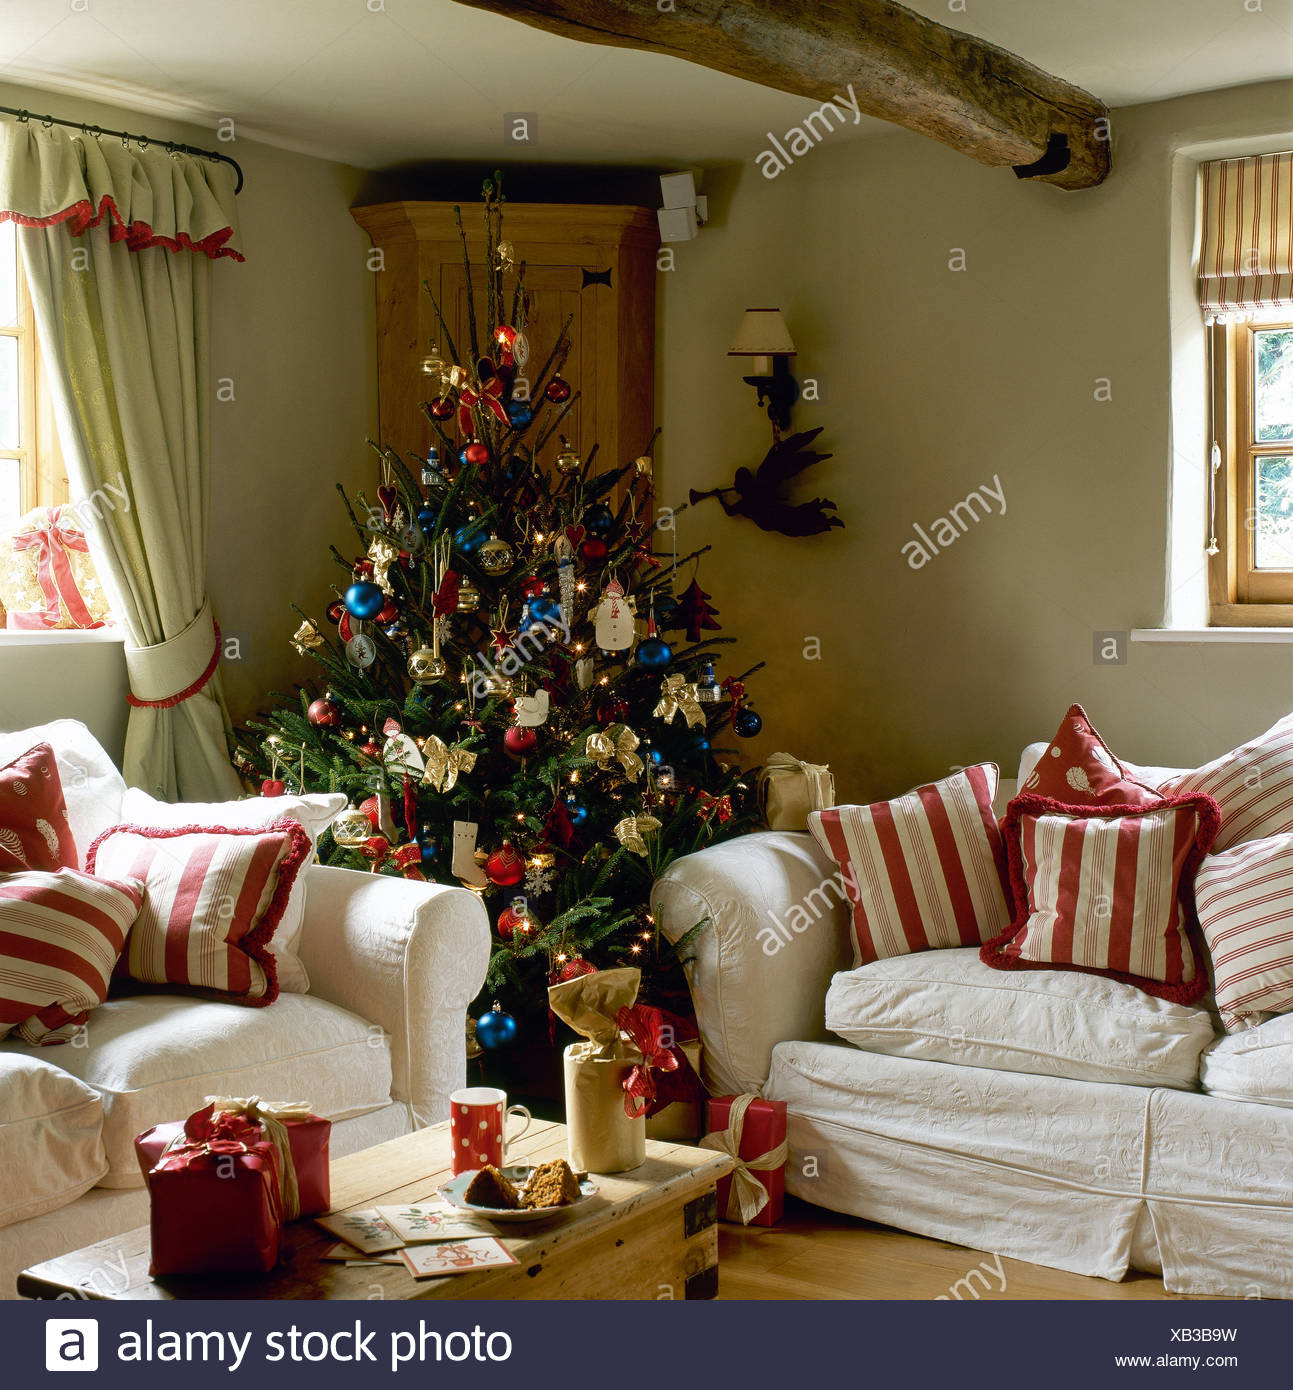 Decorated Christmas Tree In Corner Of Cottage Sitting Room With